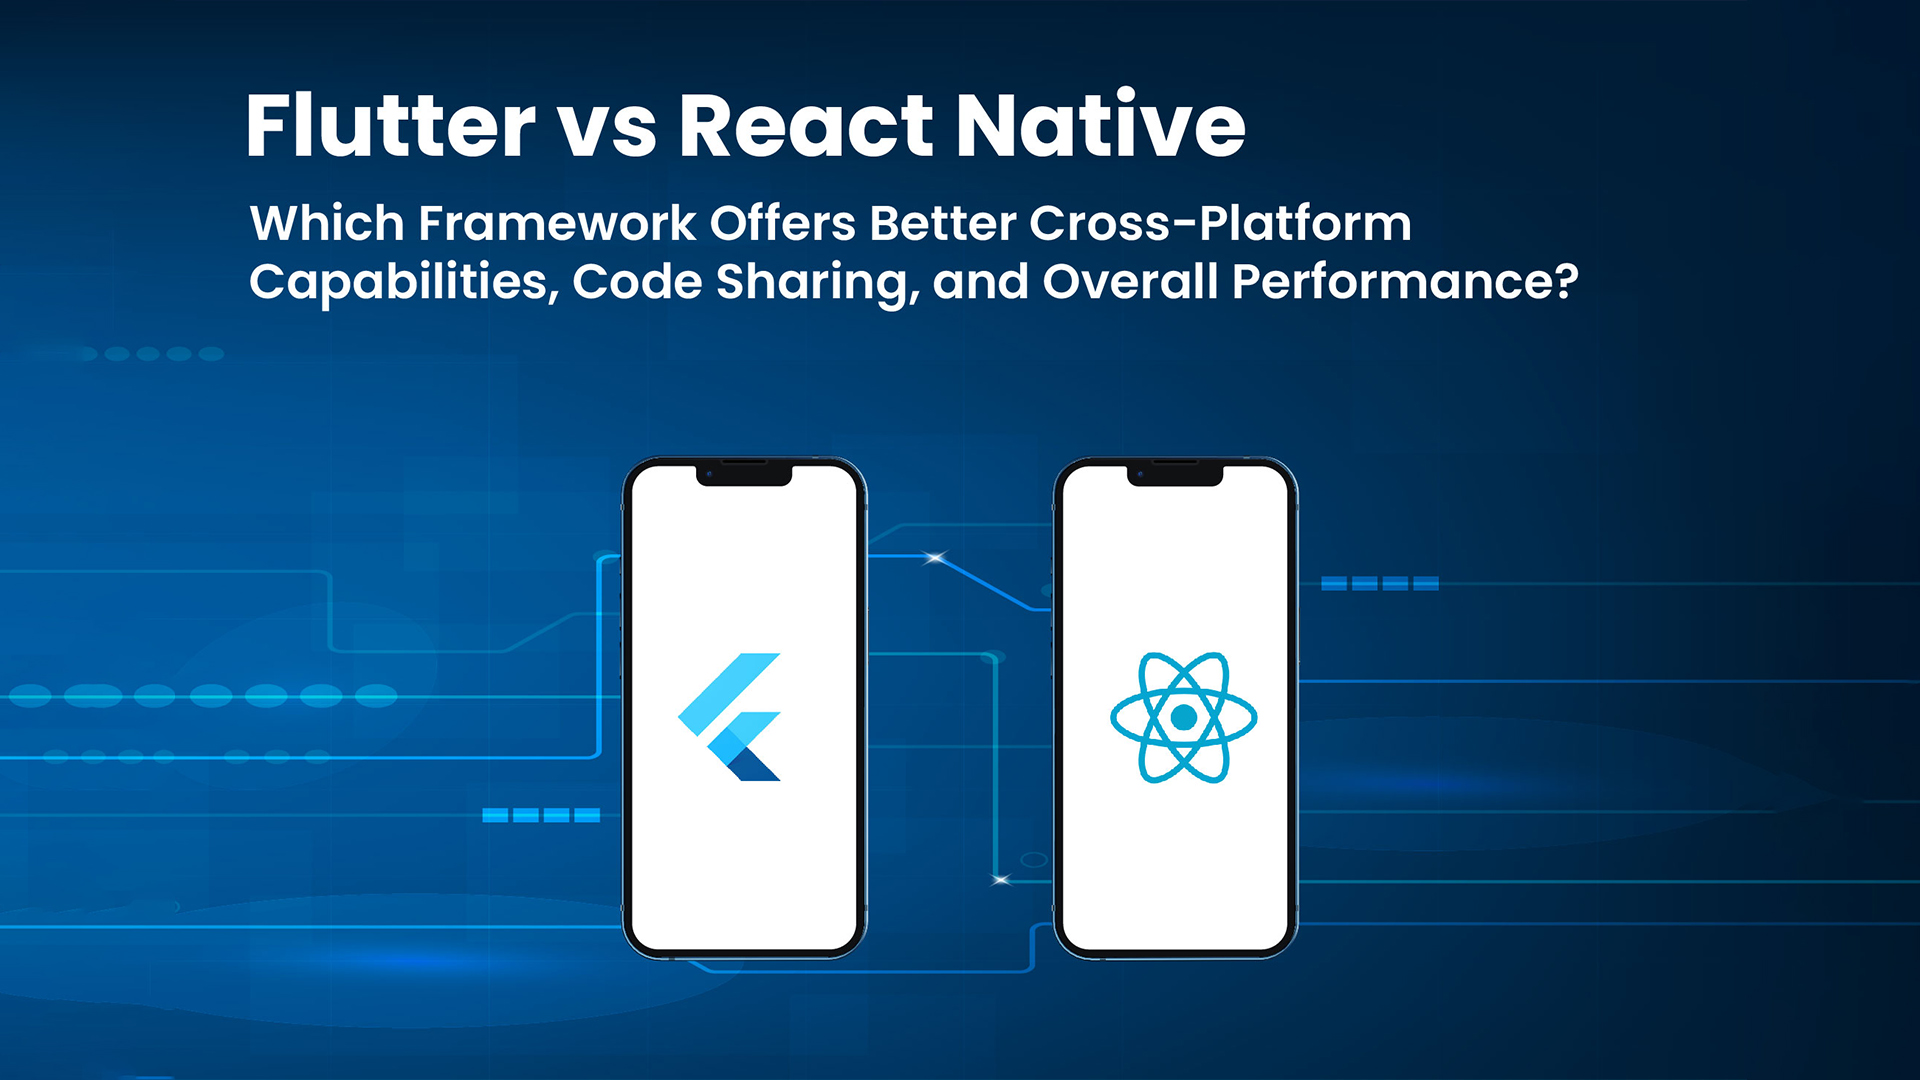 Flutter vs React Native Which Framework Offers Better Cross-Platform Capabilities, Code Sharing, and Overall Performance